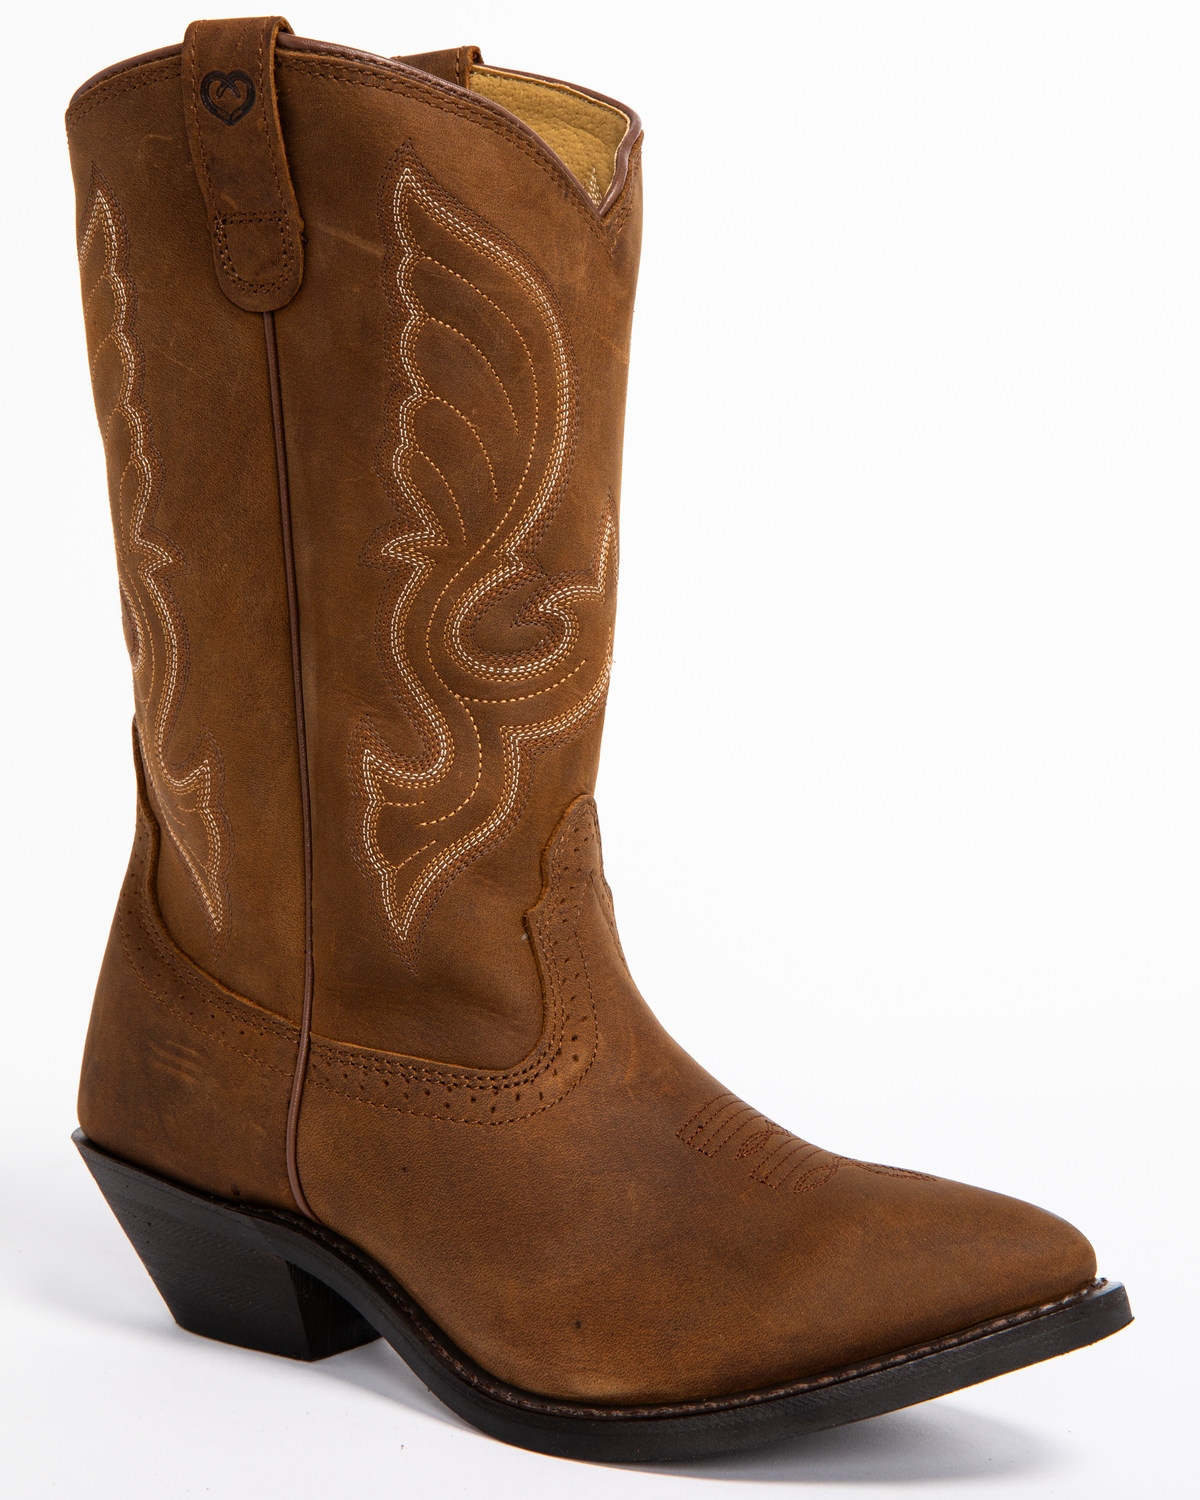 Shyanne Women's Donna Embroidered Leather Western Boots - Medium Toe